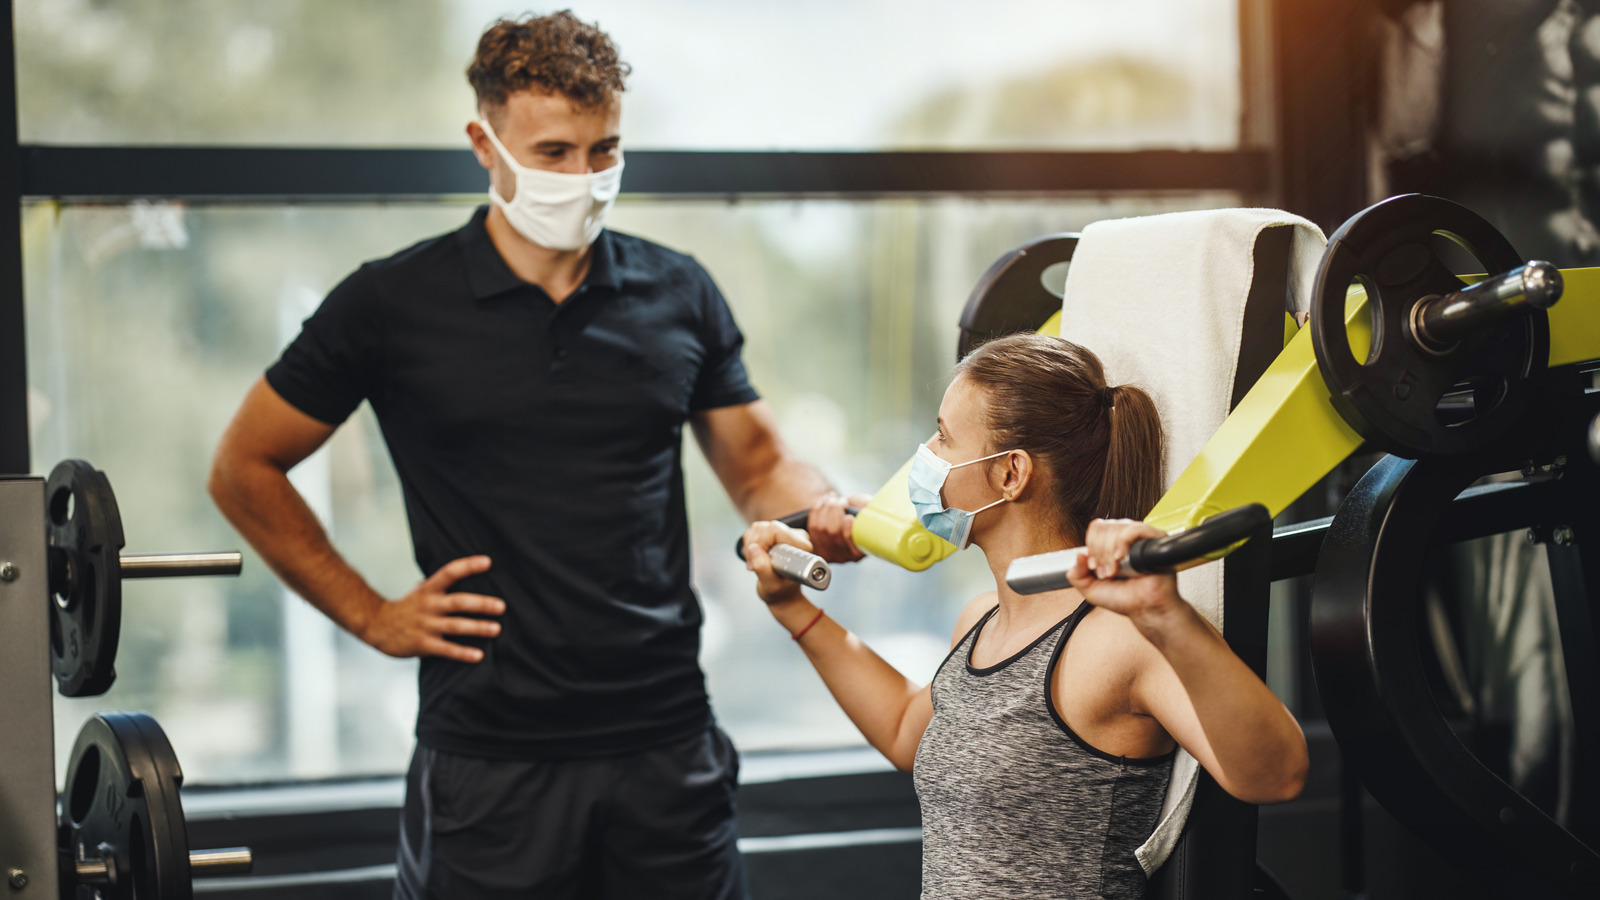 When Is It Safe To Go Back To The Gym After Getting The COVID19 Vaccine?